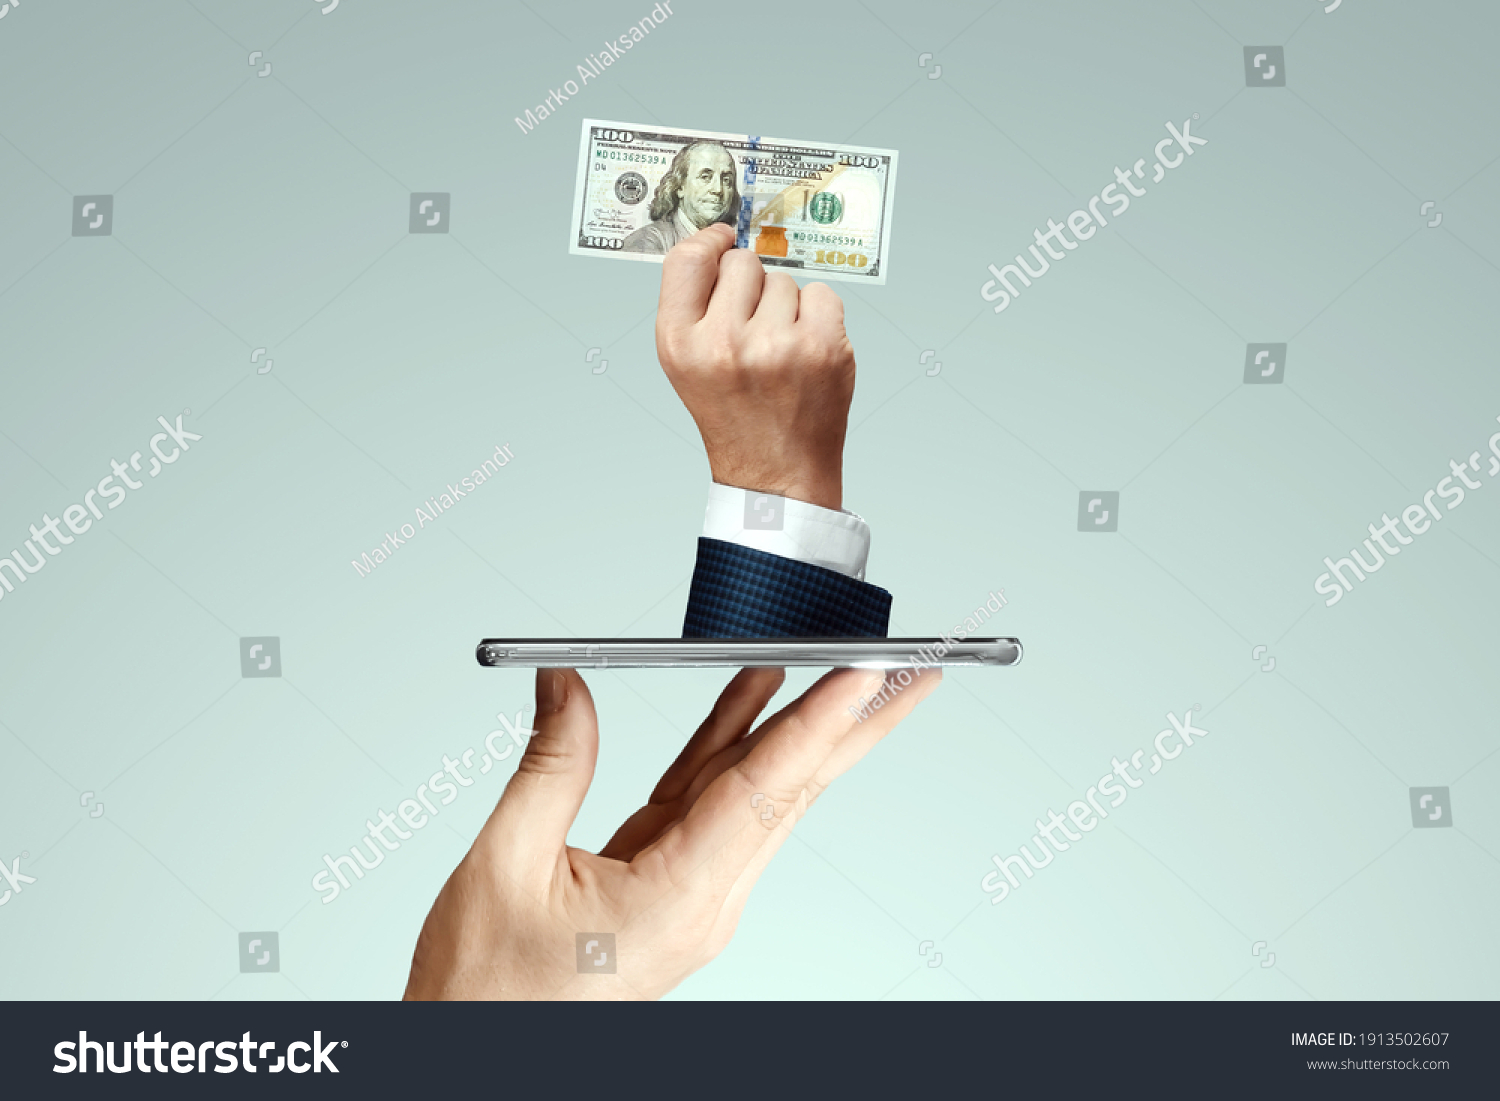 A businessman's hand crawls out of the smartphone screen with a one hundred dollar bill. Concept of money transfers, internet banking work online #1913502607